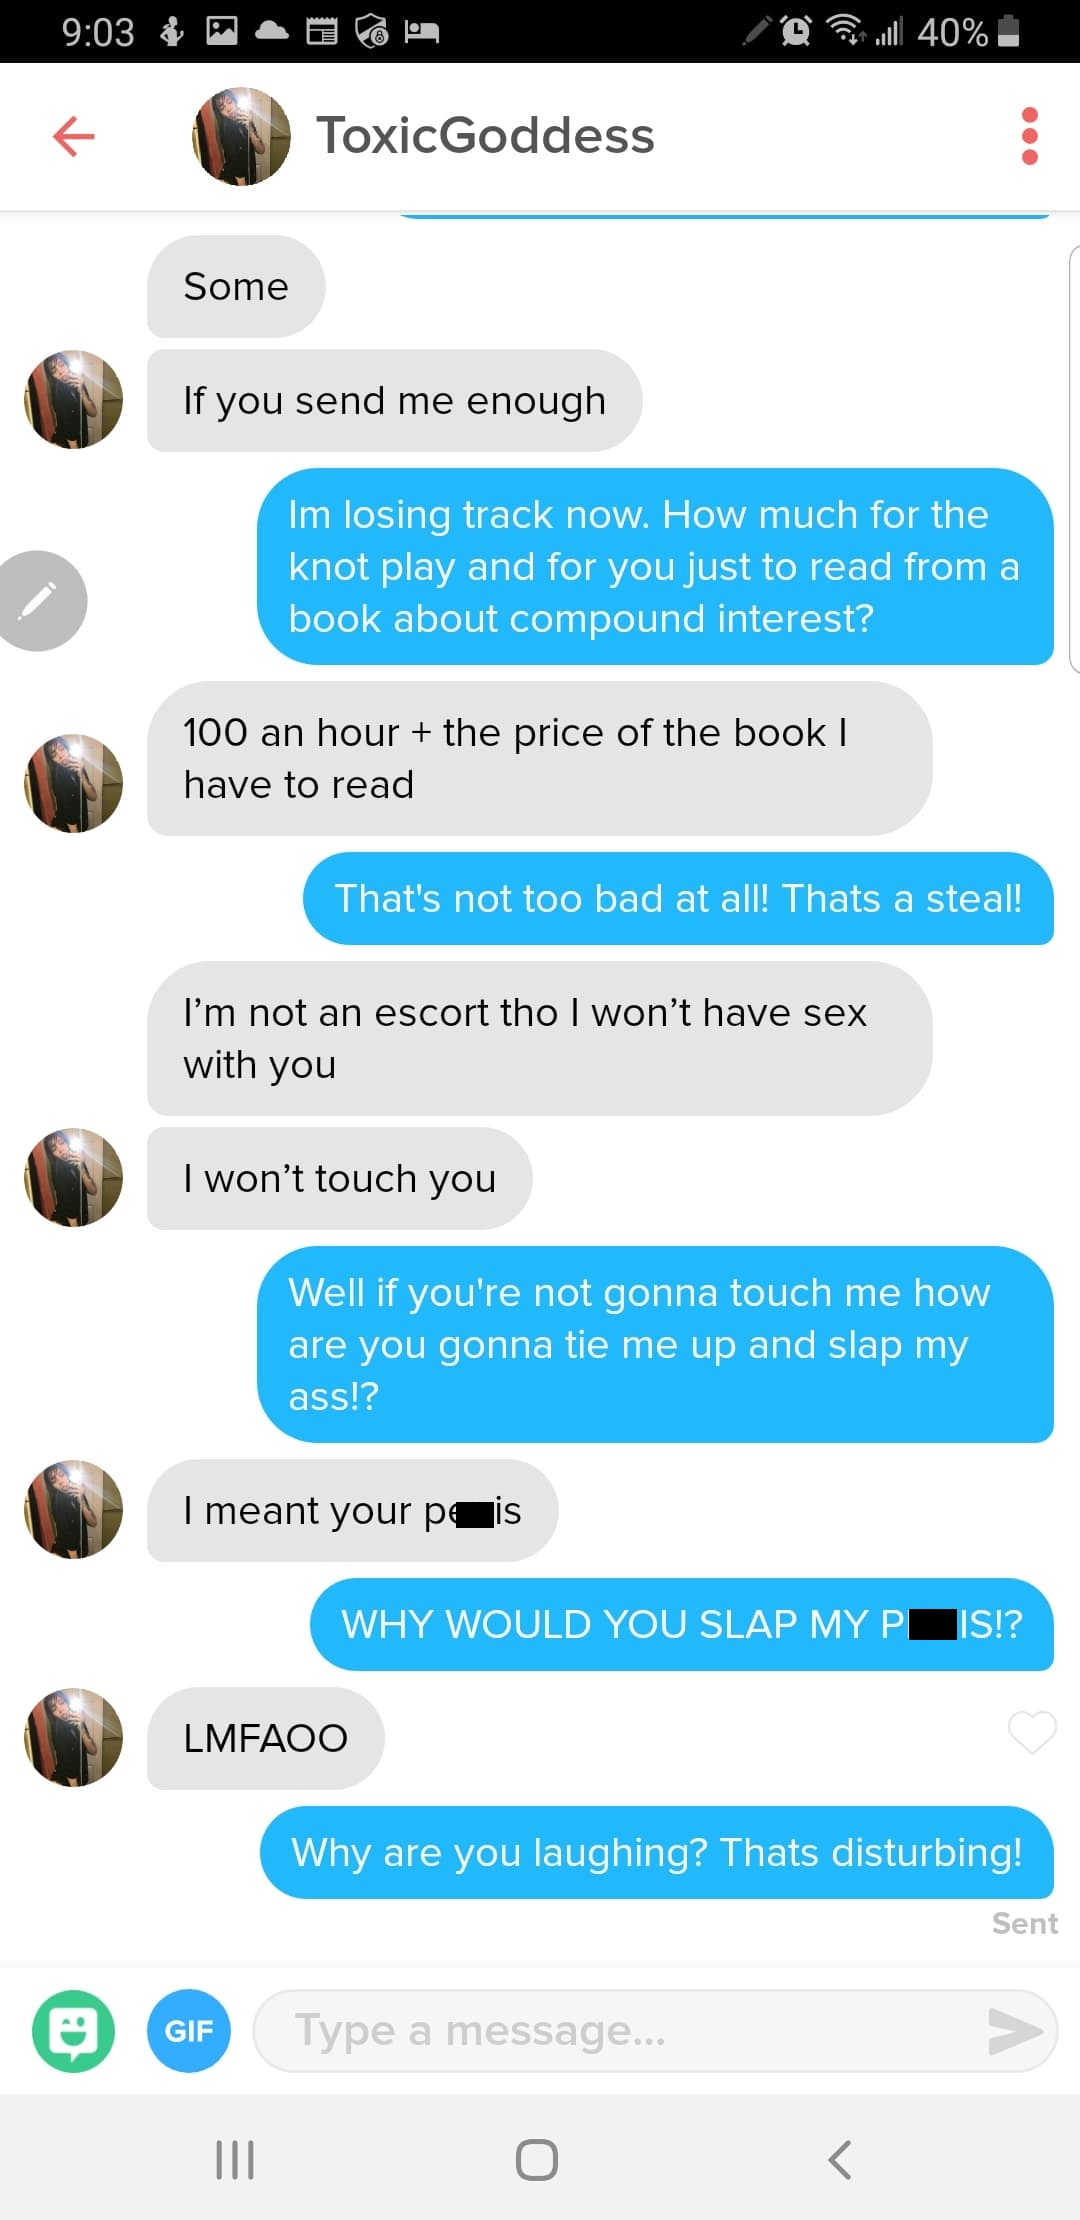 gold diggers on tinder - A . O O ll 40% ToxicGoddess Some If you send me enough Im losing track now. How much for the knot play and for you just to read from a book about compound interest? 100 an hour the price of the book | have to read That's not too b